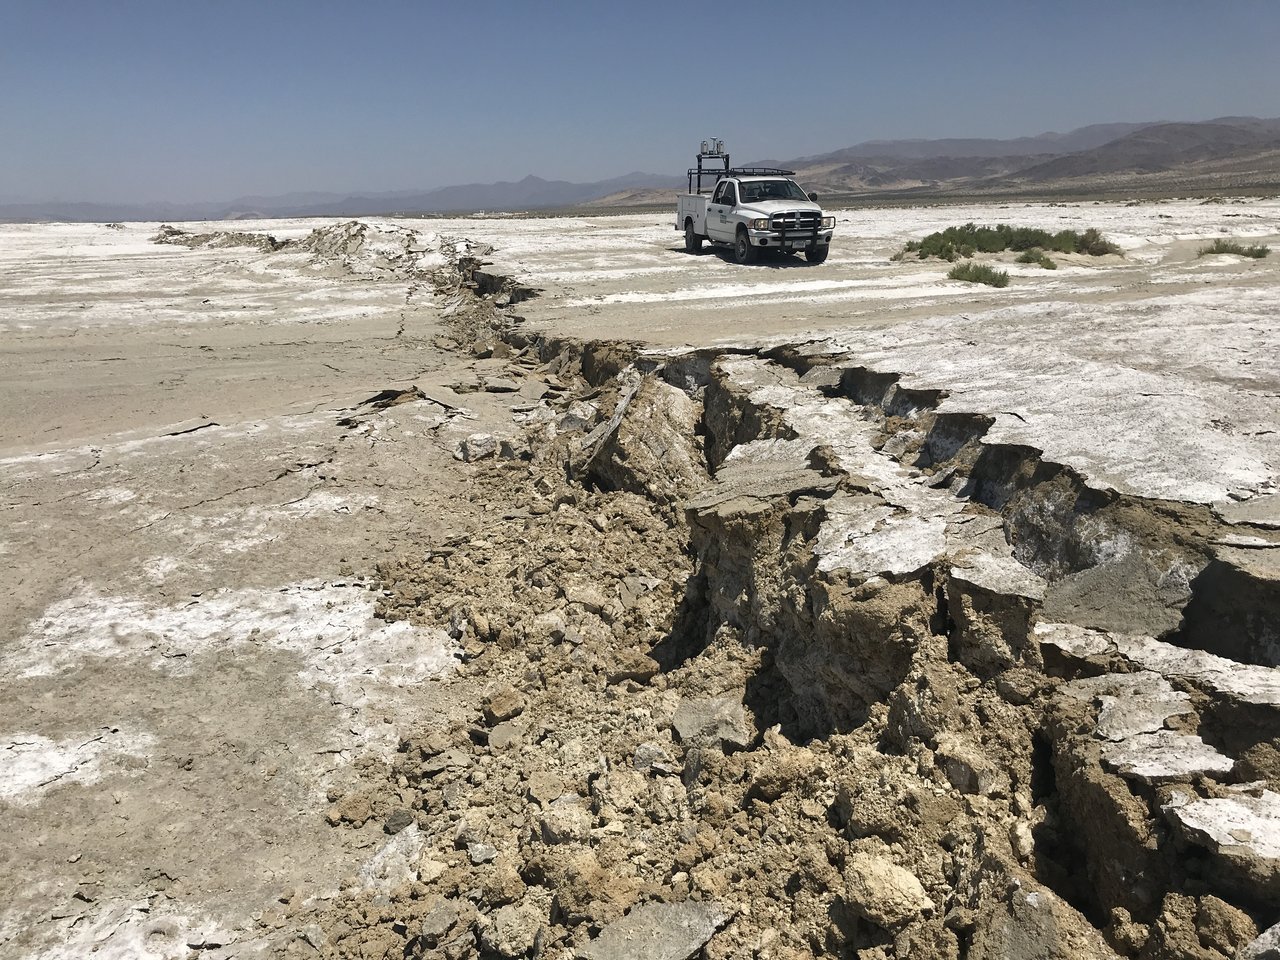 Can Climate Affect Earthquakes Or Are The Connections Shaky